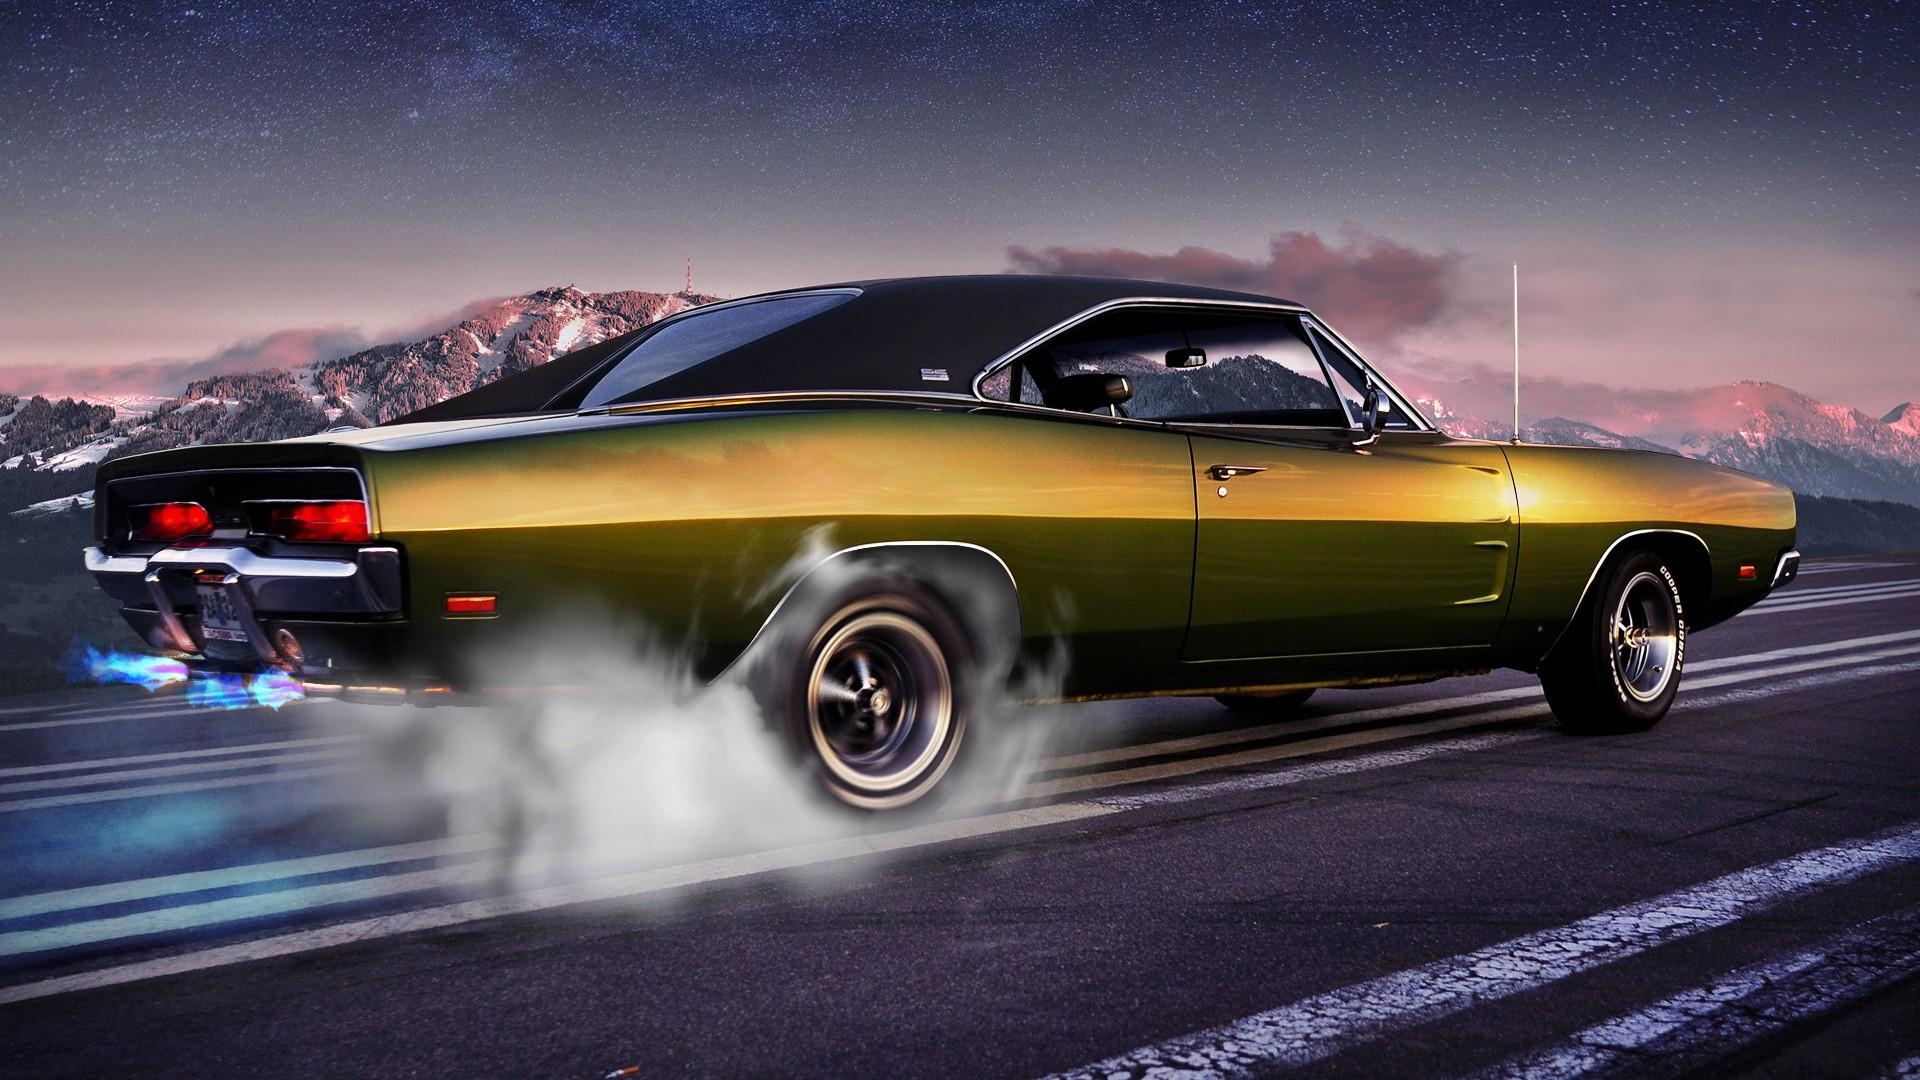 Awesome Muscle Car Wallpaper Gallery